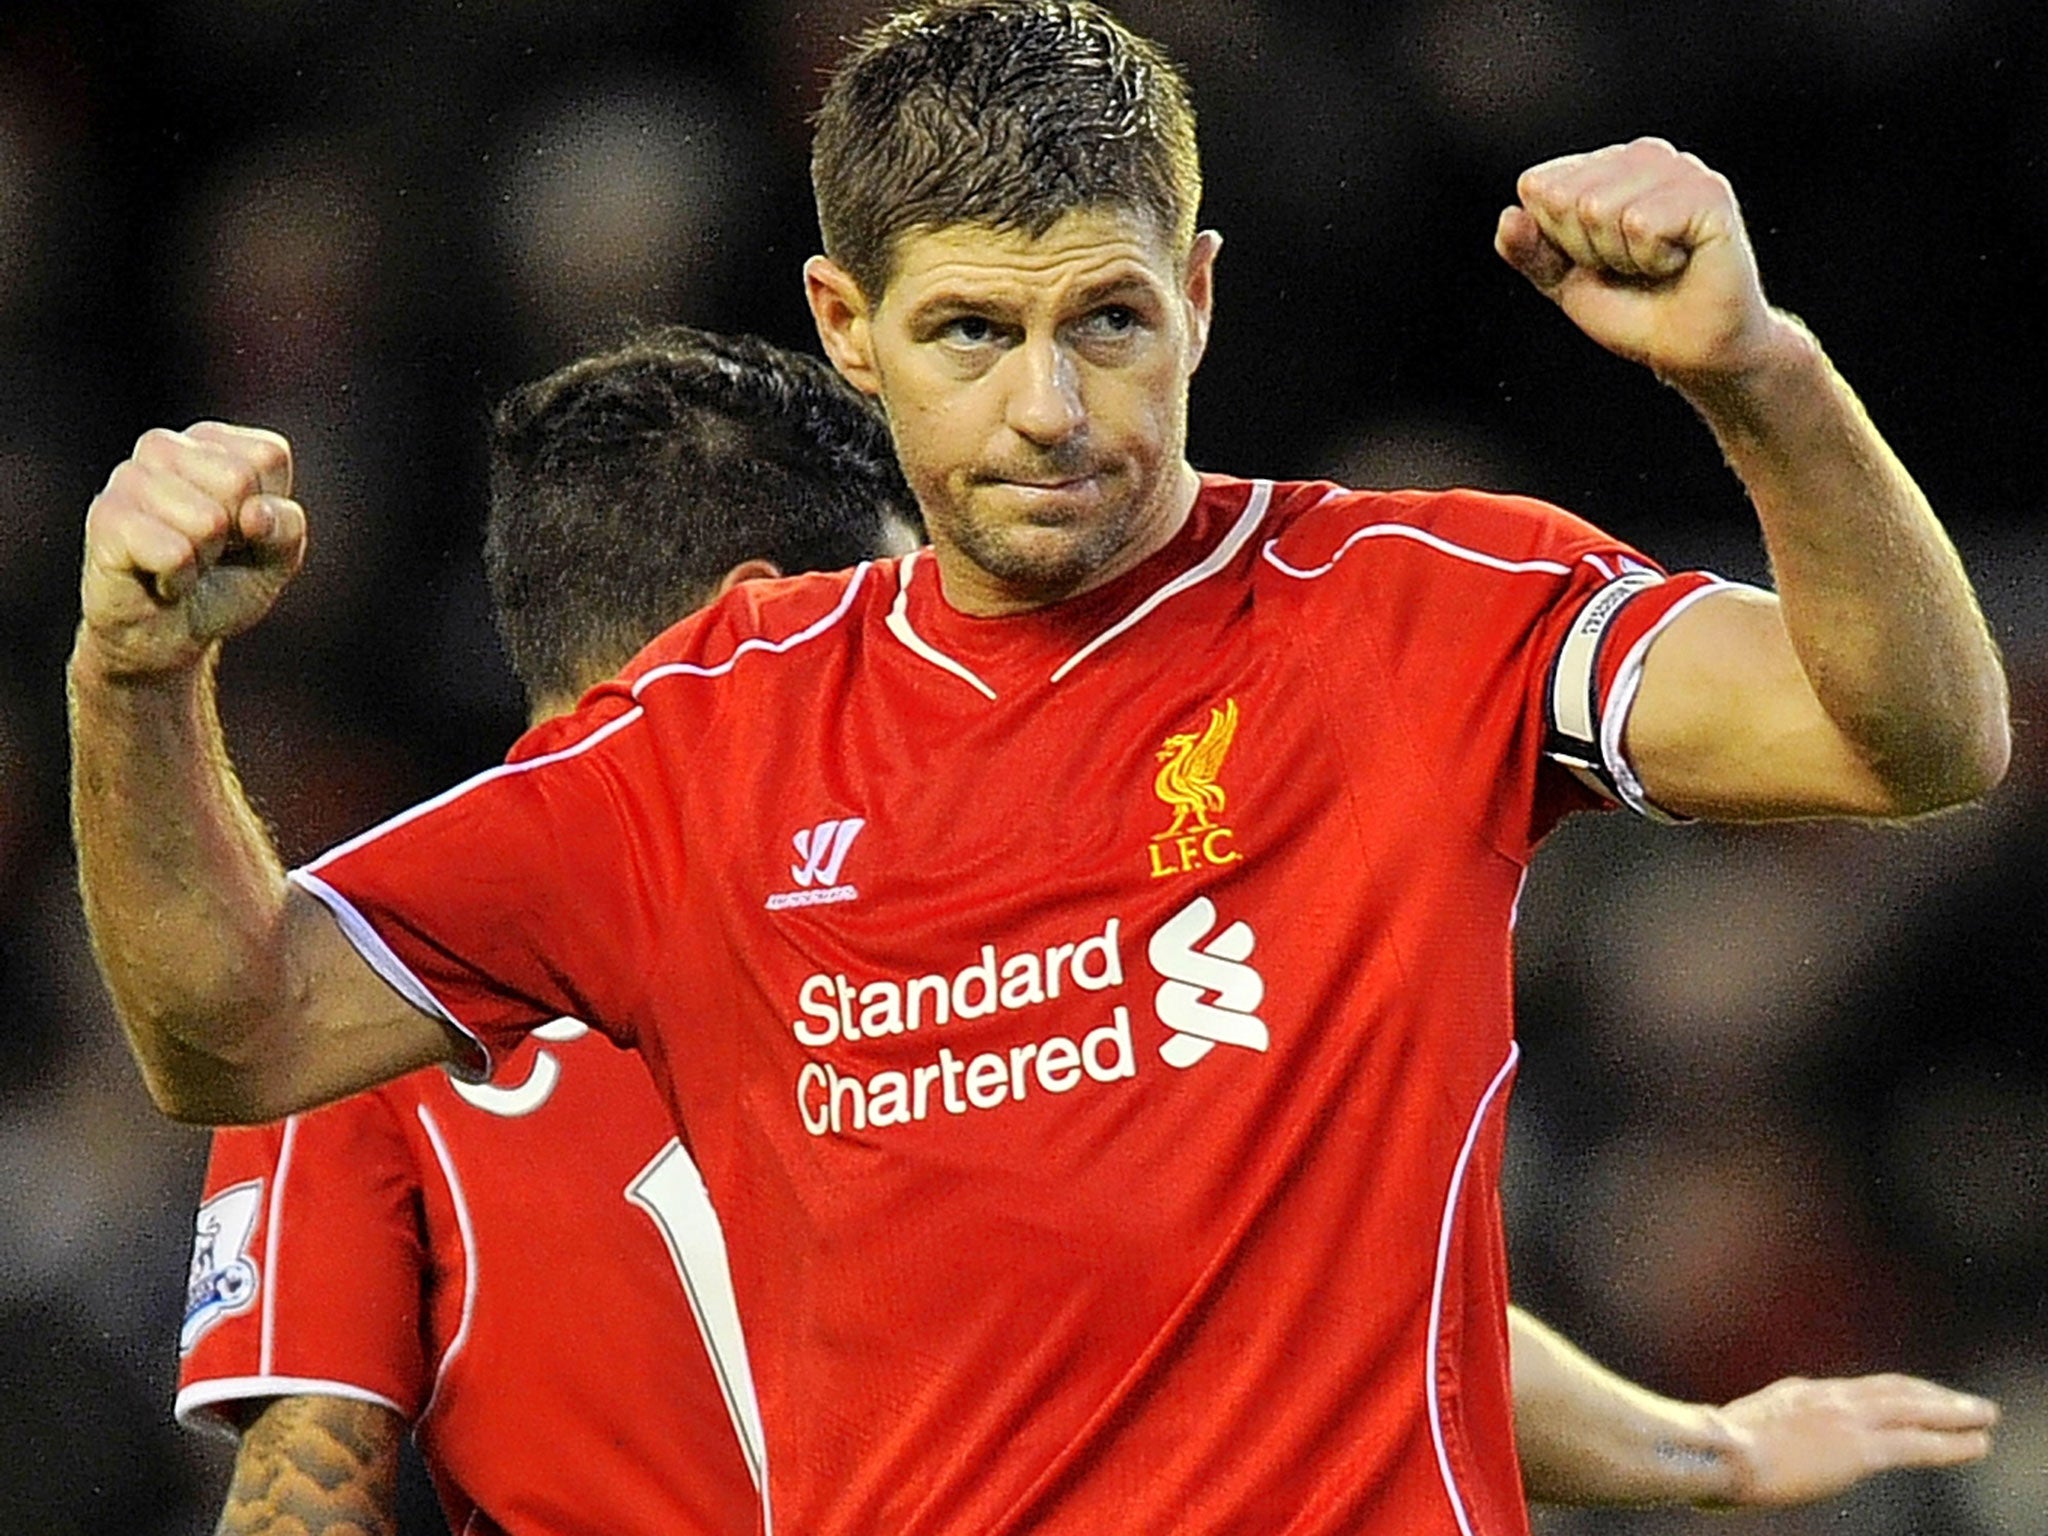 Steven Gerrard is on the verge of signing with LA Galaxy